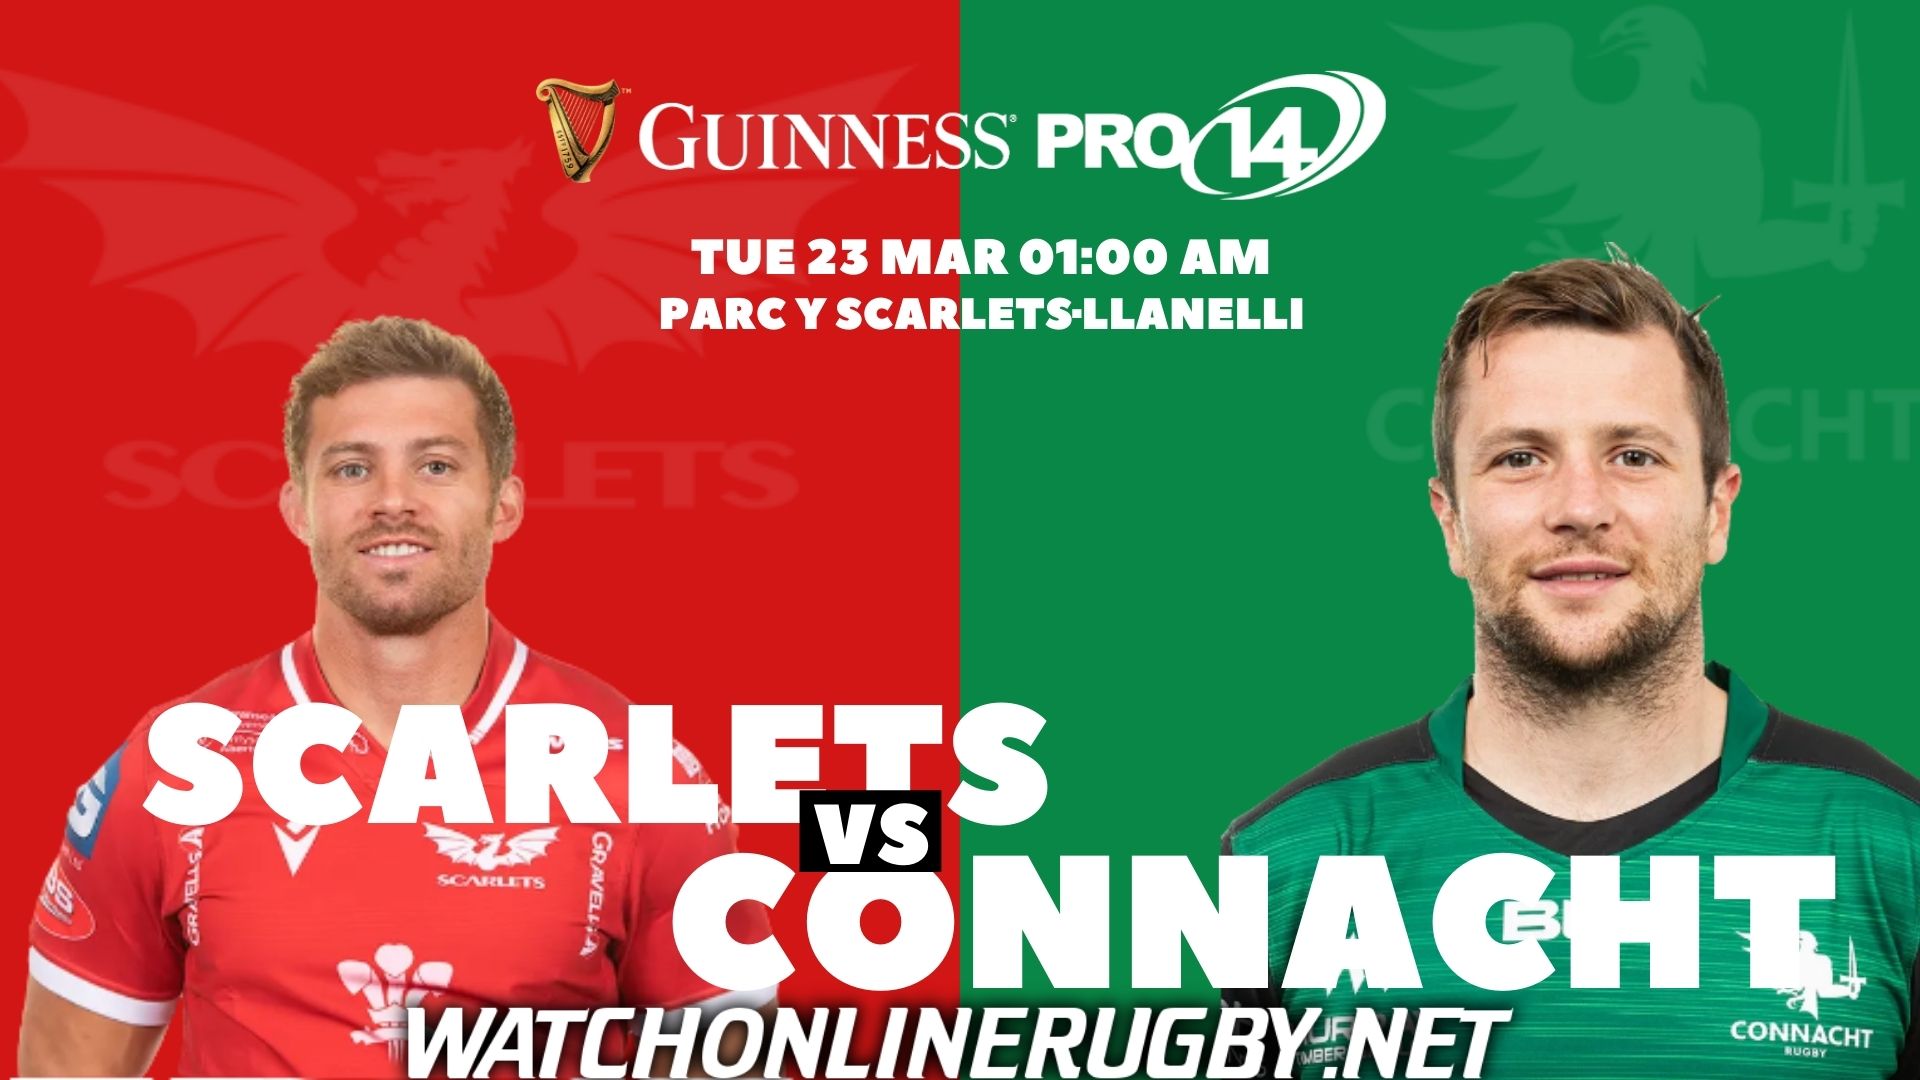 Watch Connacht Vs Scarlets Rugby Live